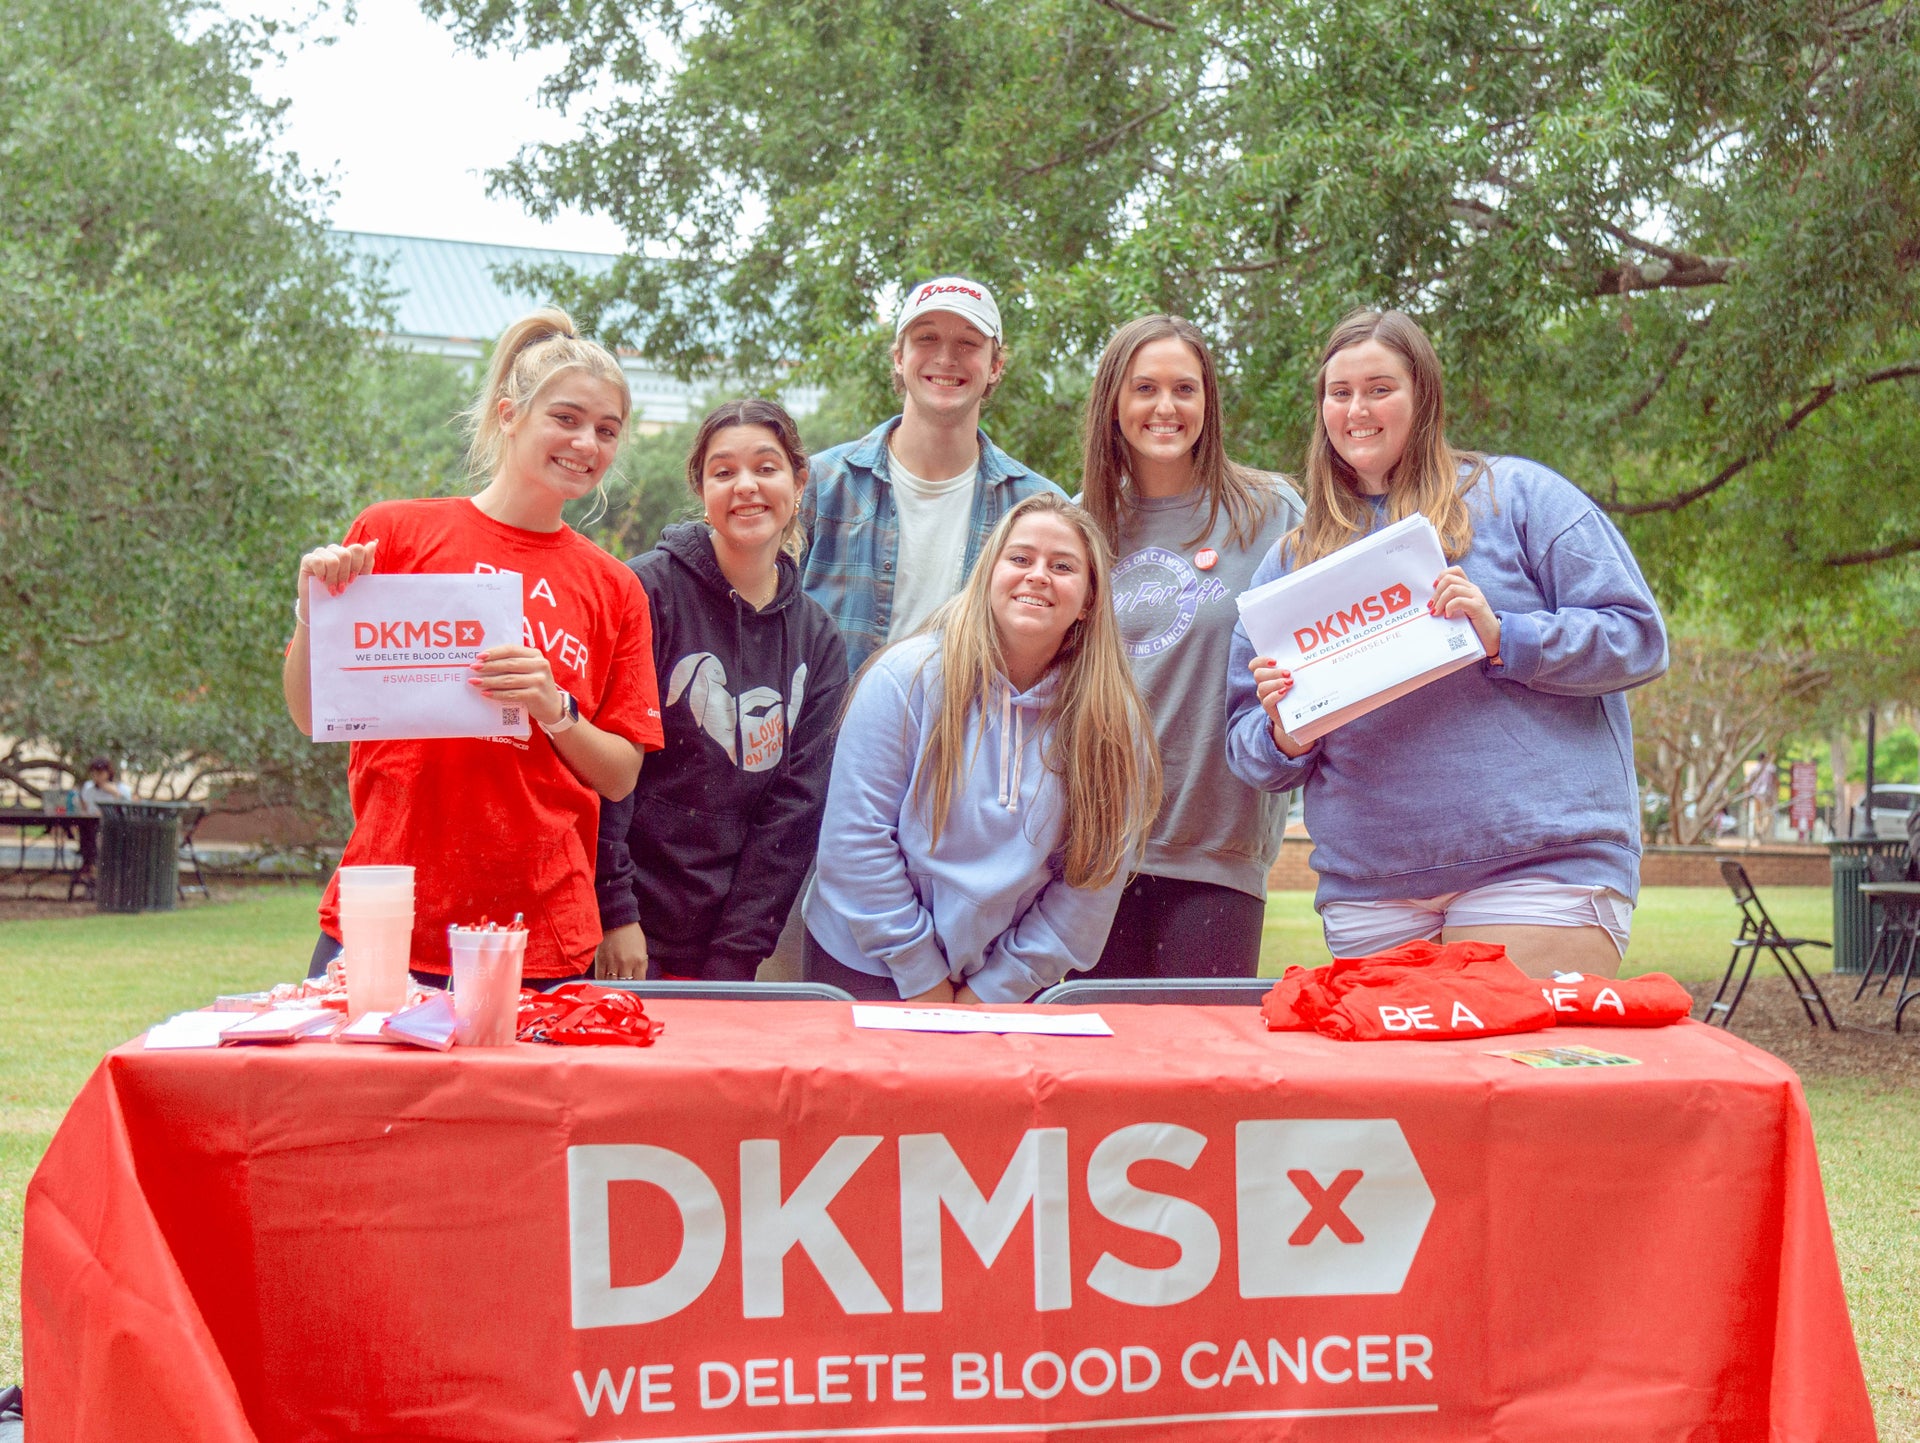 Students at University of South Carolina hosting a college bone marrow donor recruitment drive with DKMS